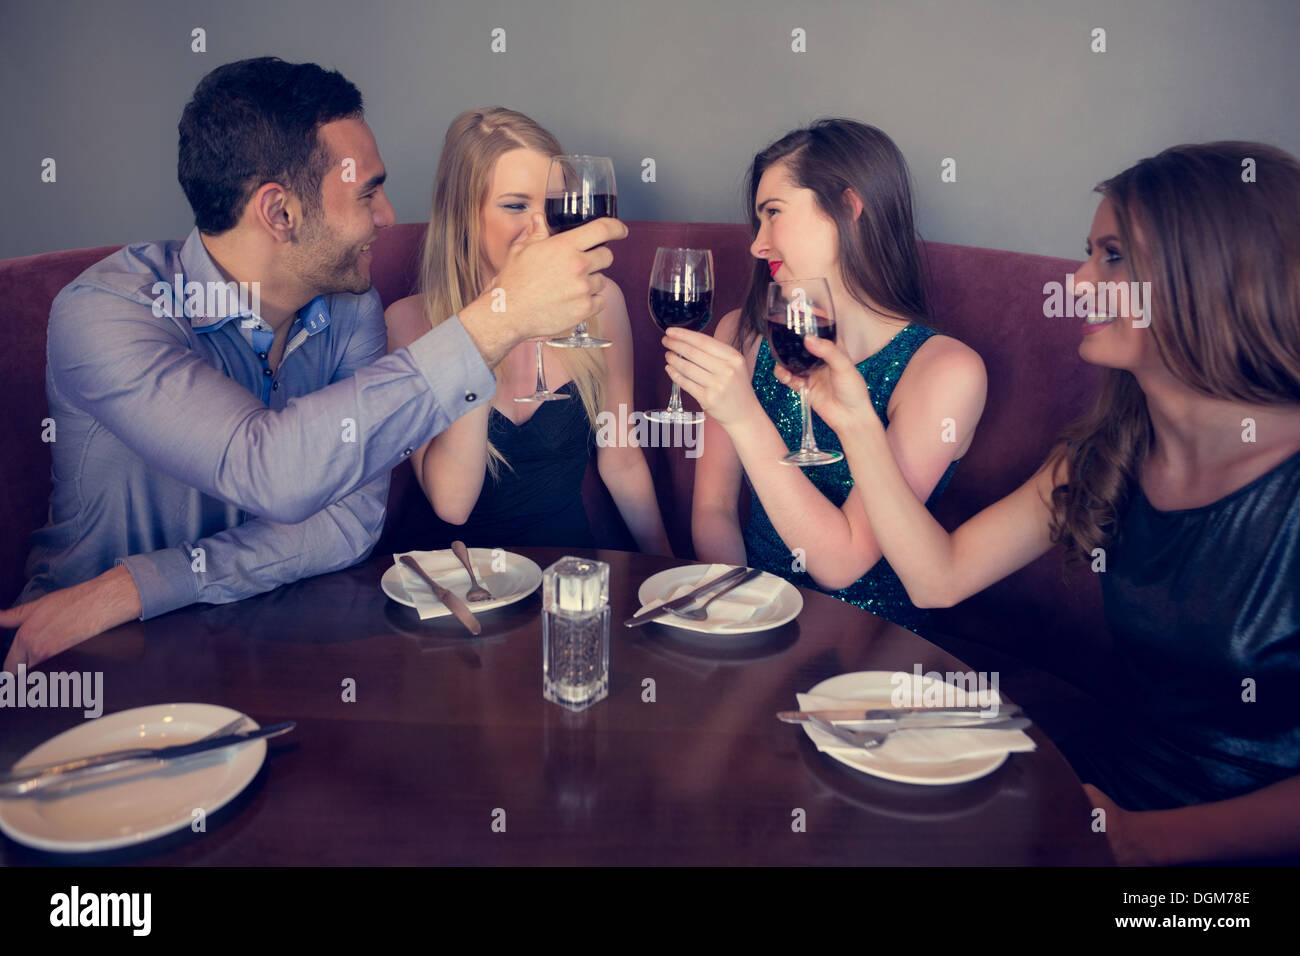 Smiling friends clinking wine glasses Stock Photo